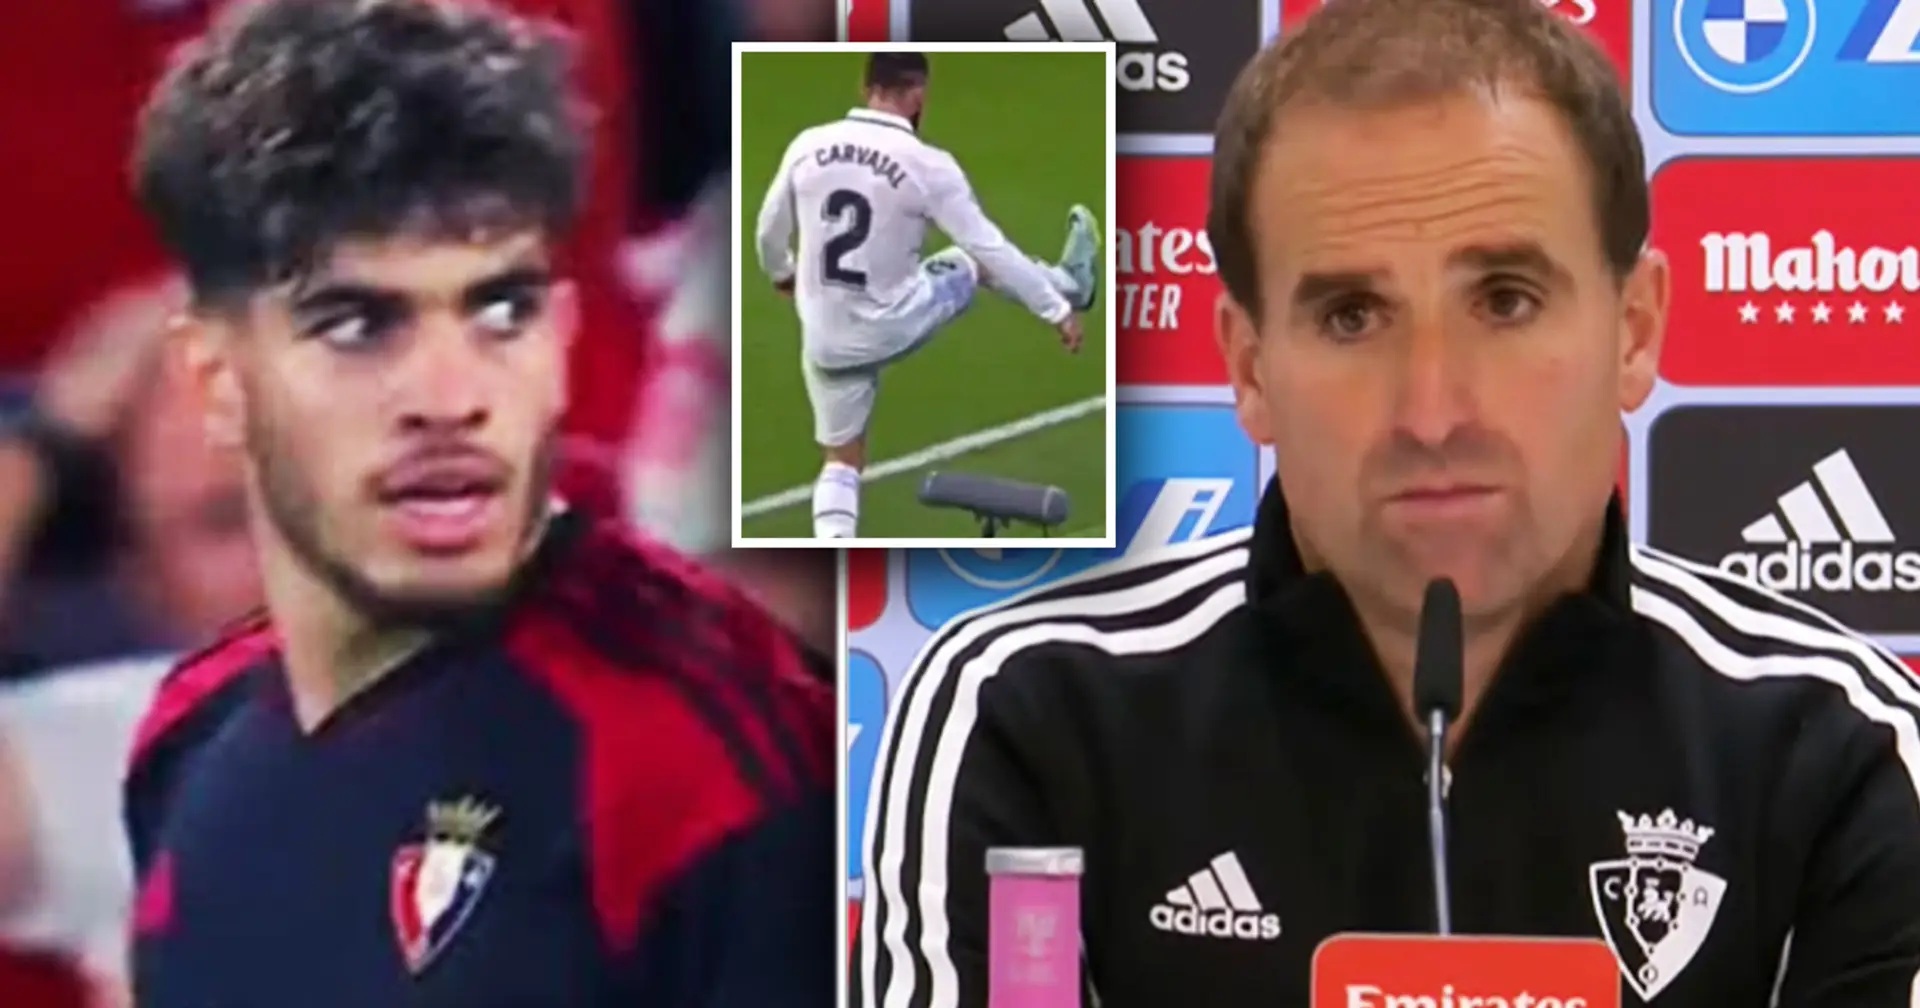 'He is different gravy': Abde impresses v Real Madrid at Bernabeu, Osasuna coach reacts